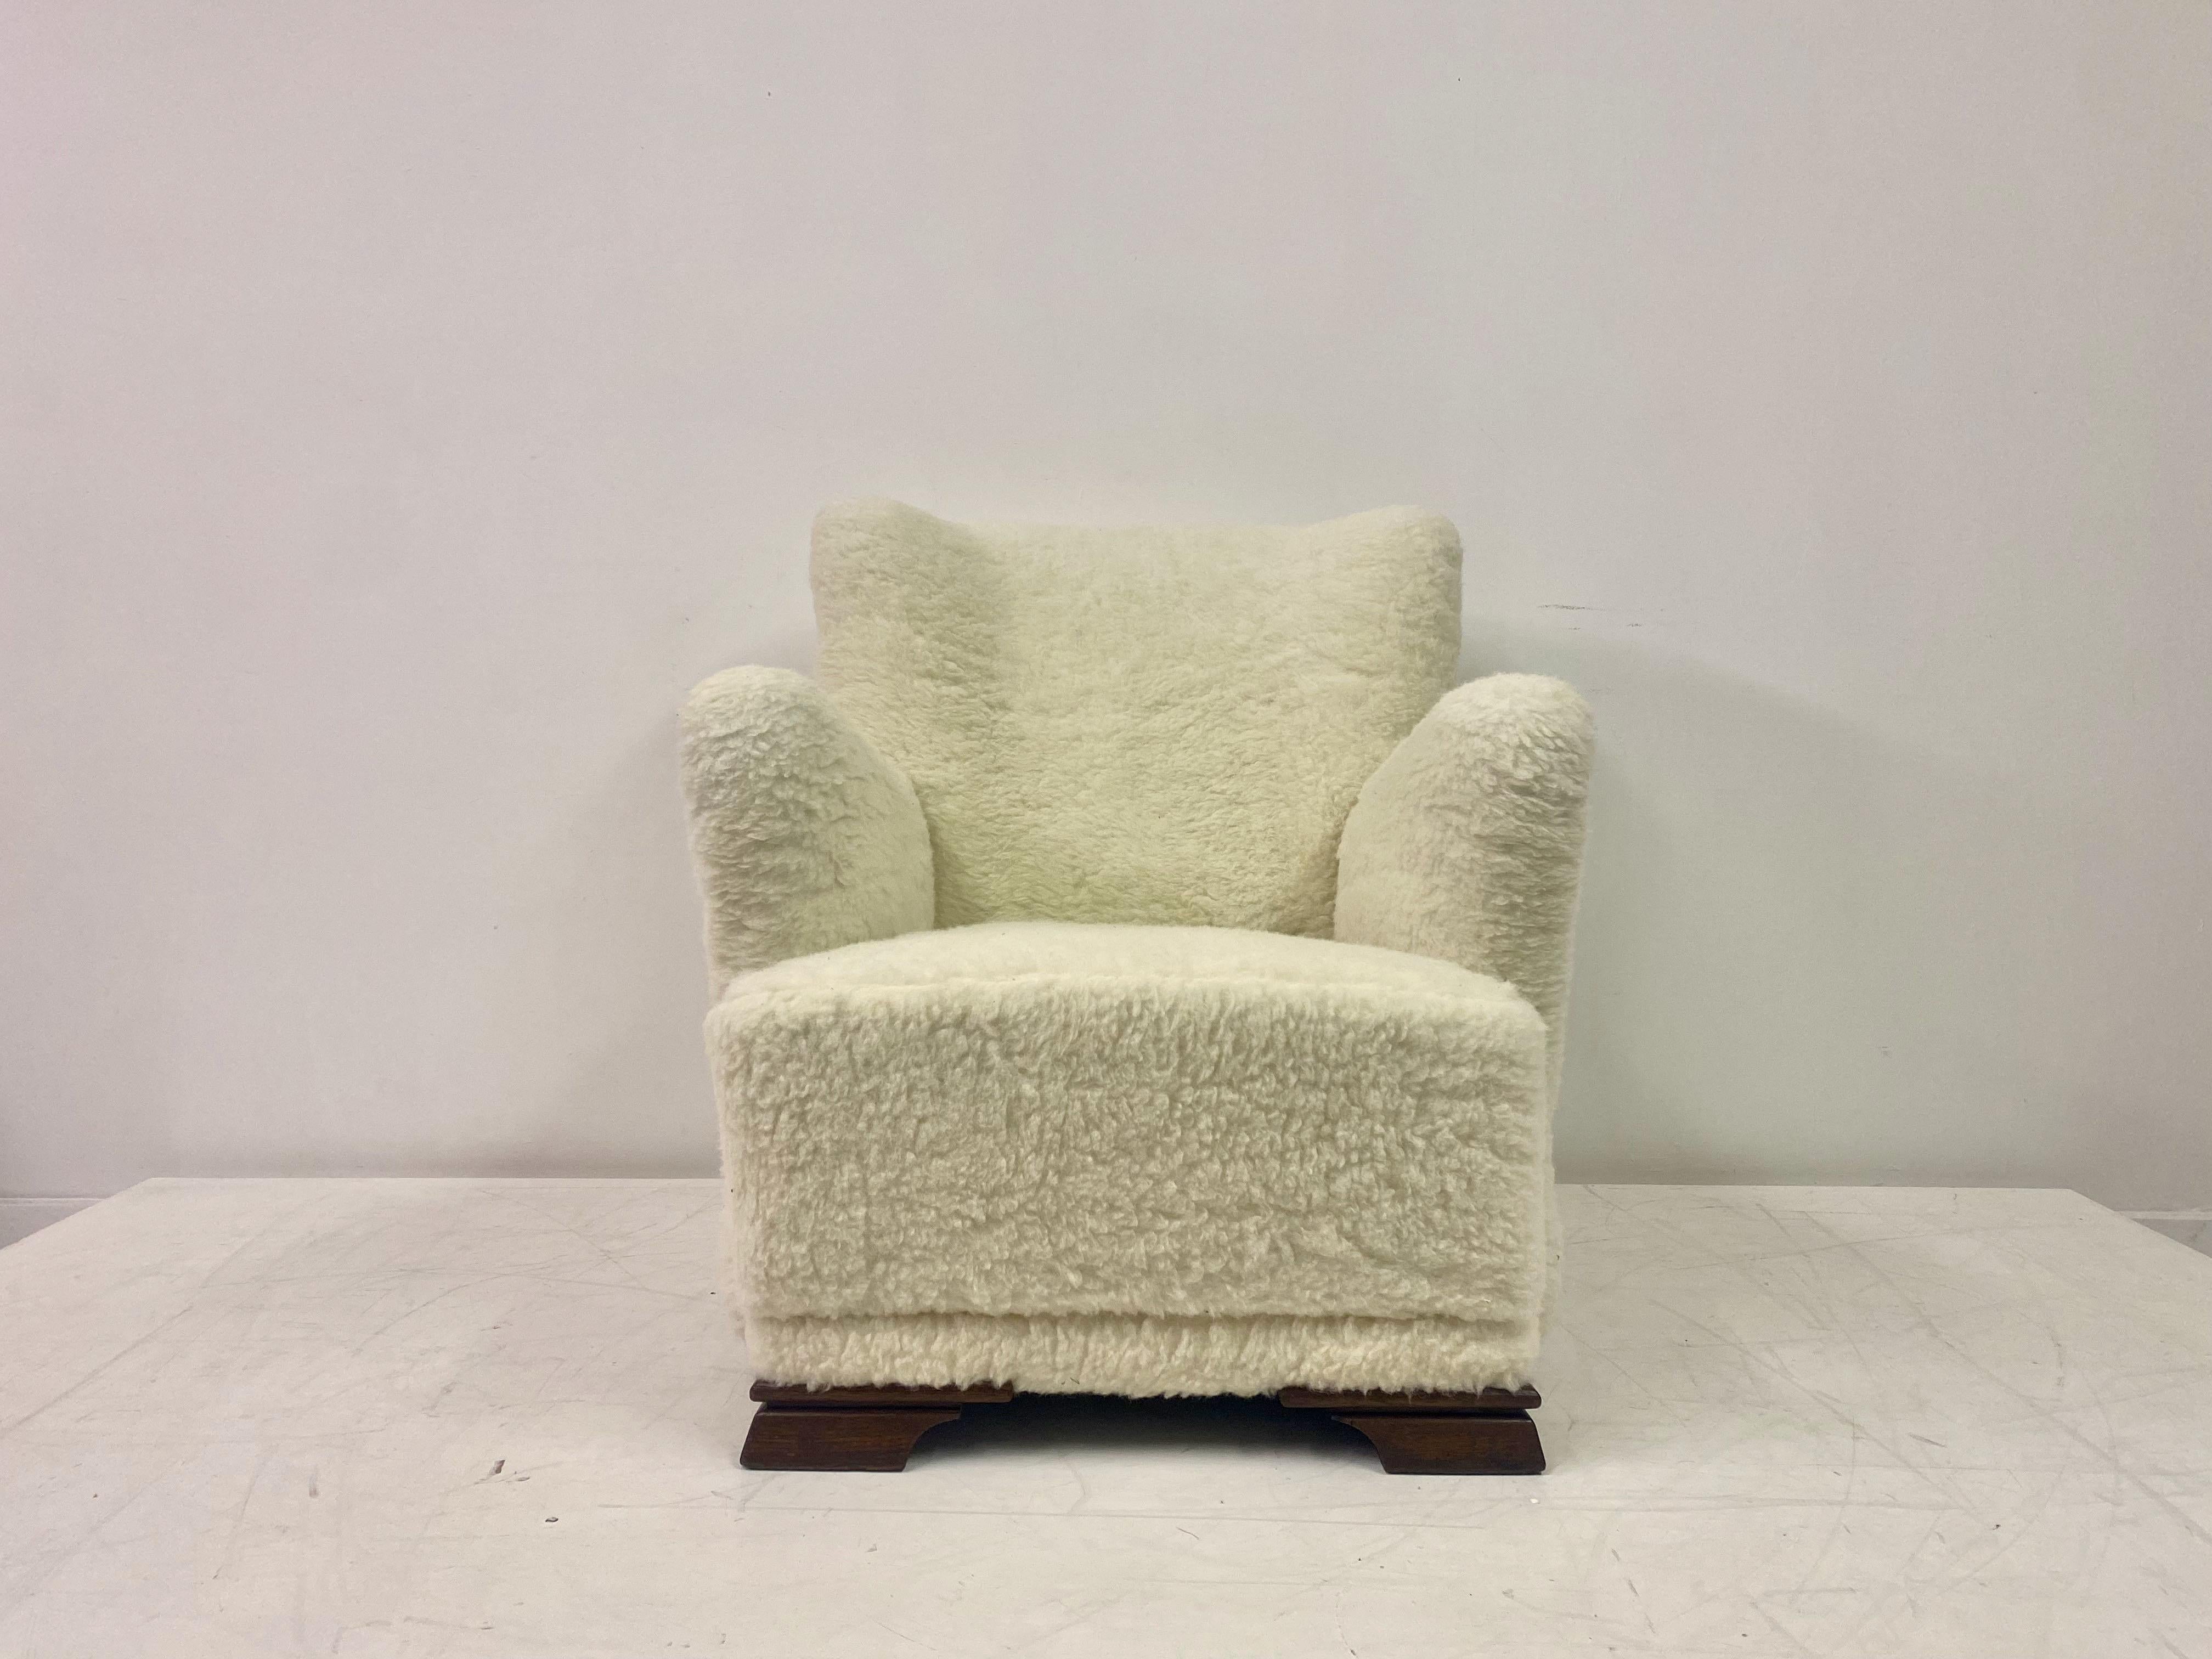 Armchair

Upholstered in lambs wool

Wooden feet

Sprung seat

Restored condition

Danish 1950s.
 